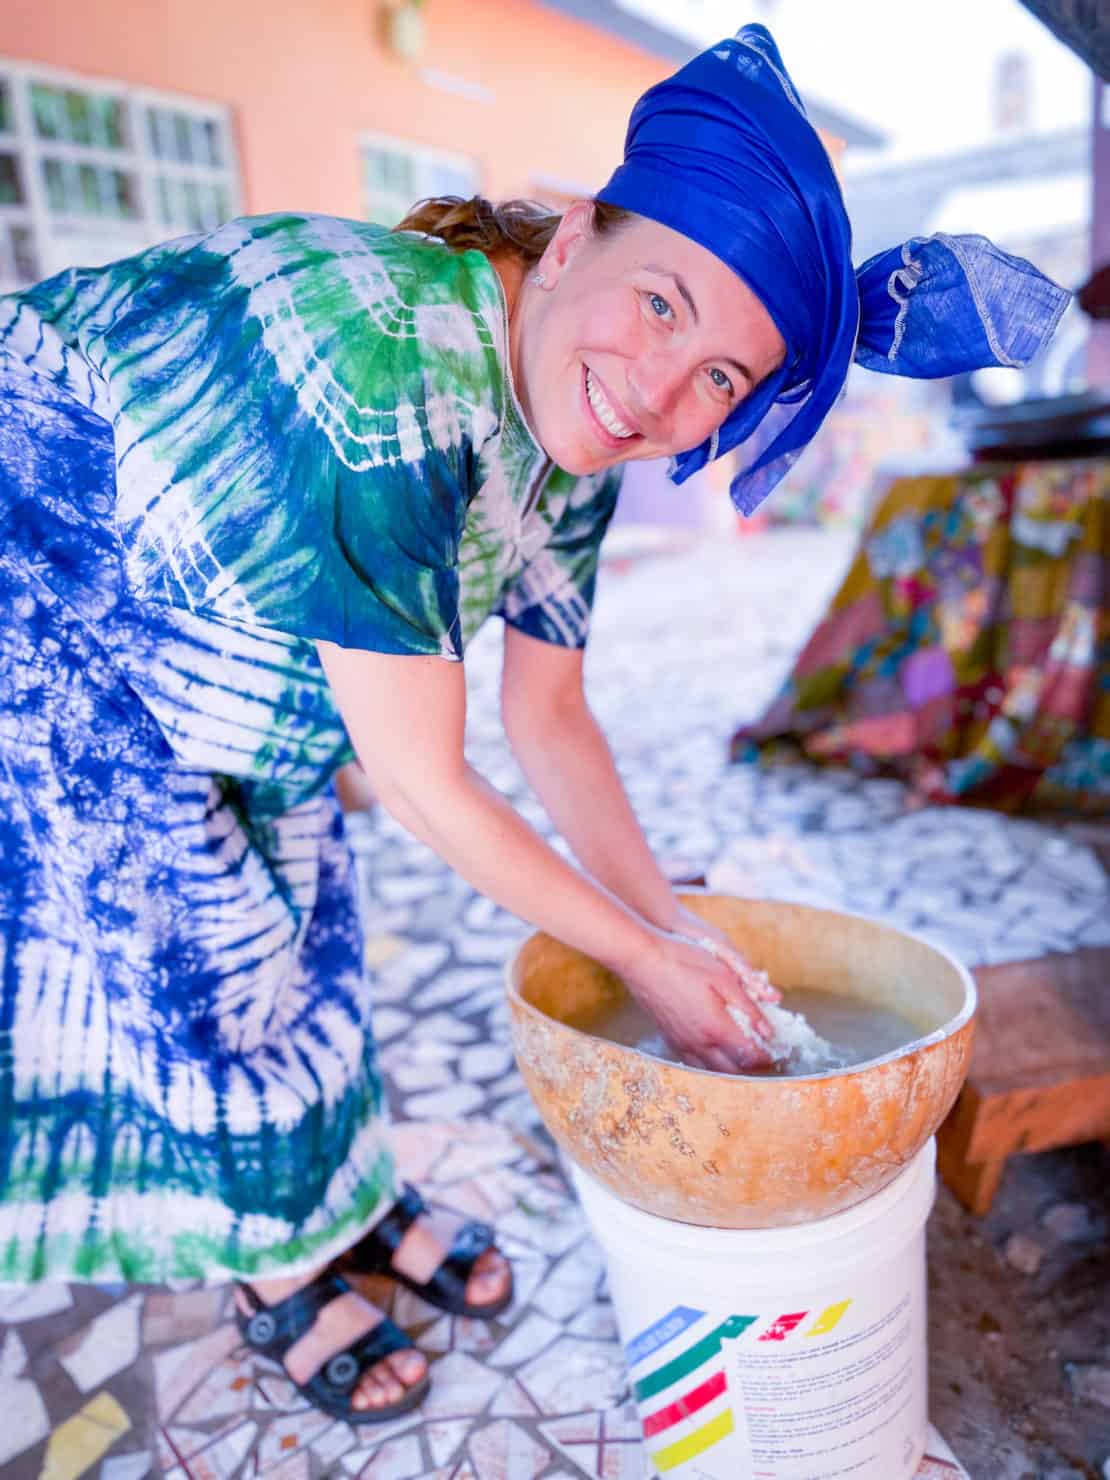 Abigail King rinses cherreh as part of a Gambian cooking class in traditional clothes